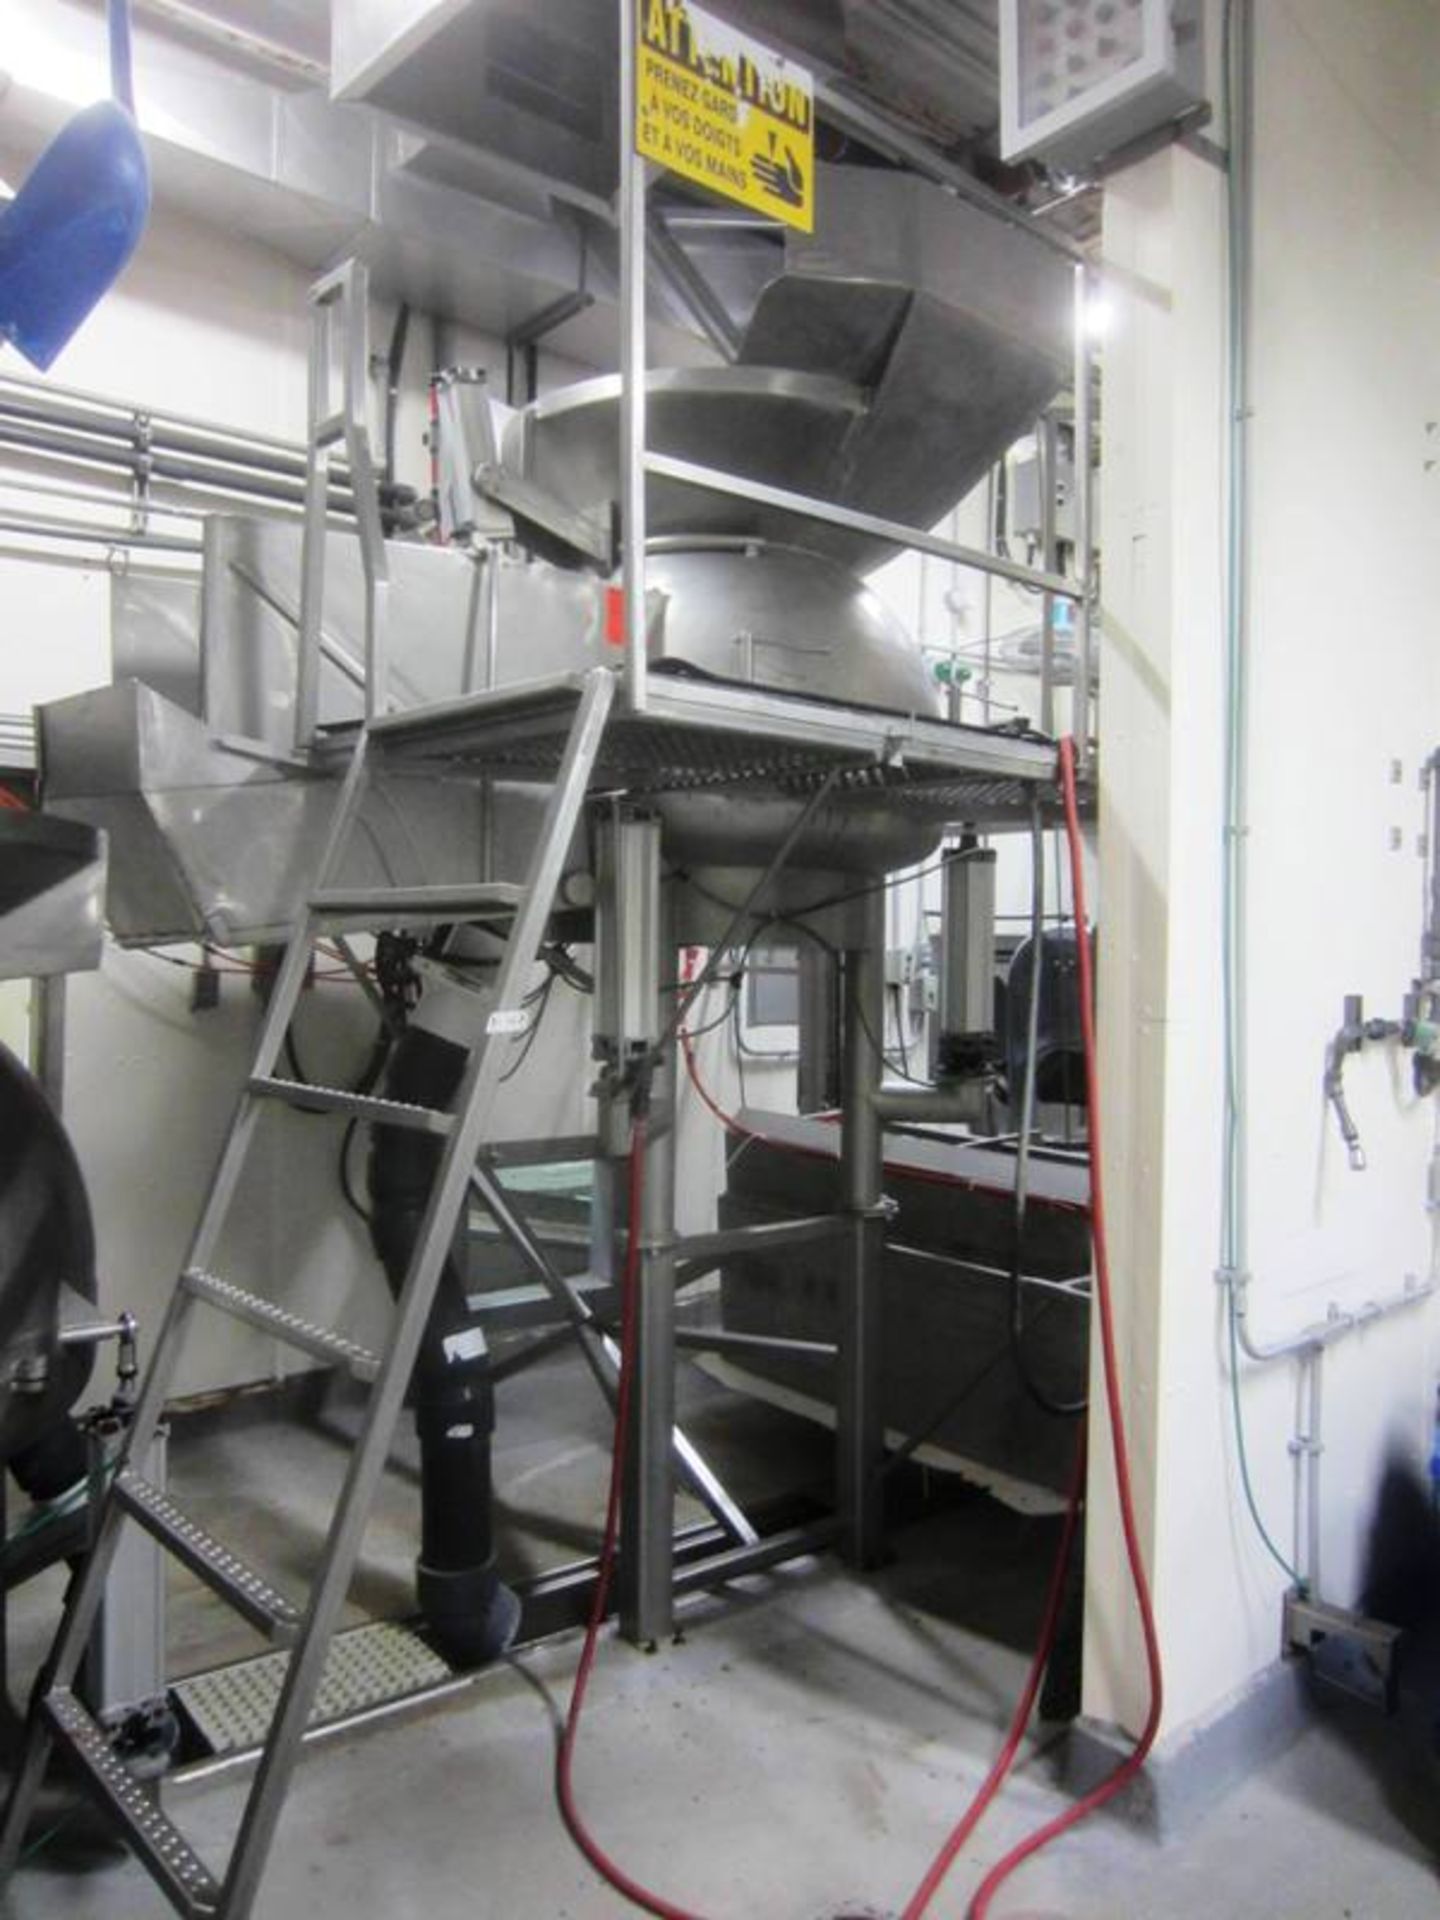 TecFood Mdl. V20 S.S. Stomach Washer with s.s. loader 3' W X 5' L, complete with rail, overhead work